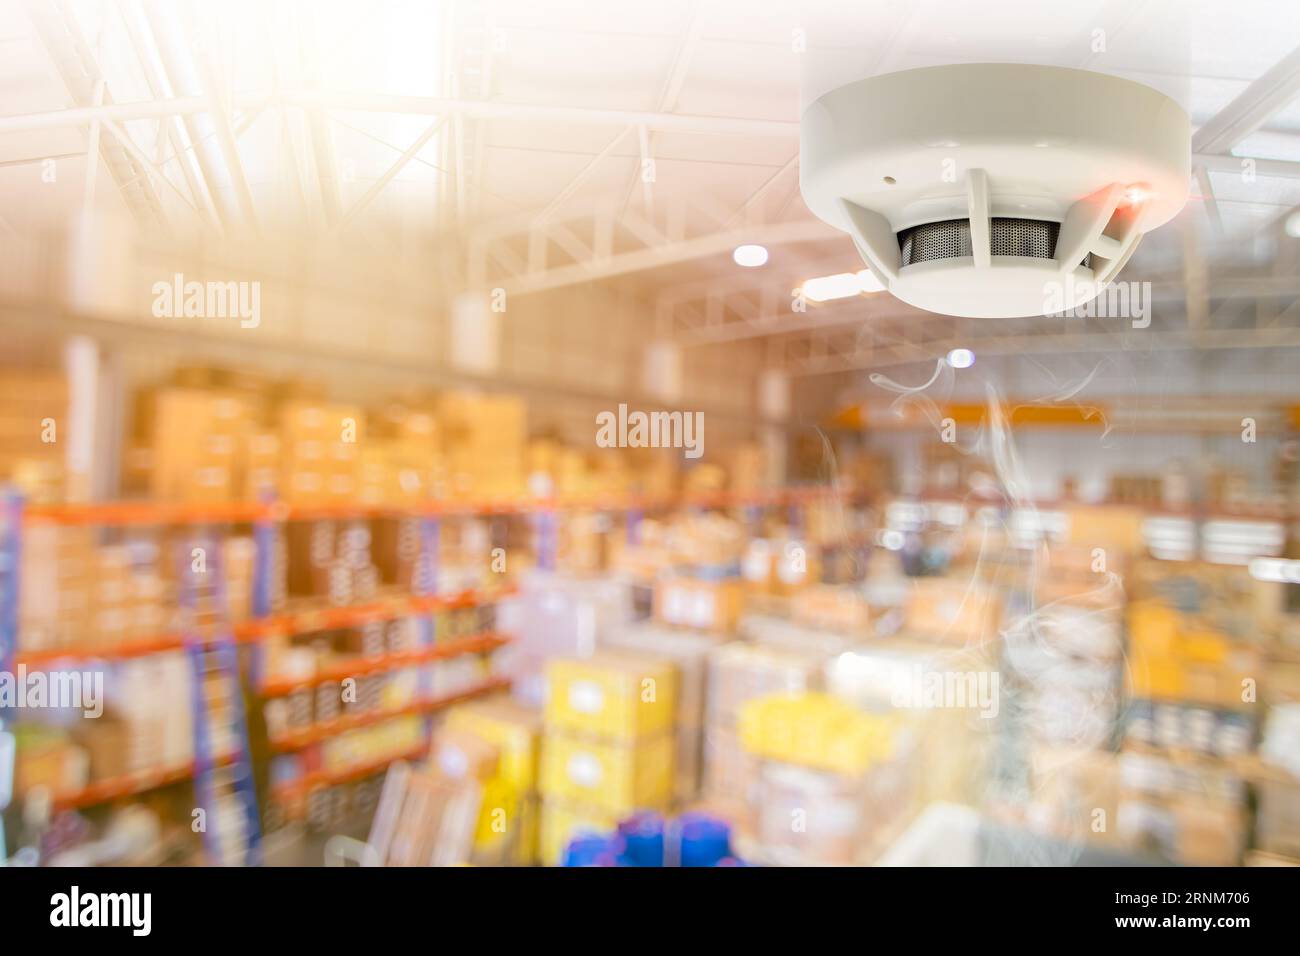 Fire Alarms for Warehouse Smoke Detector Fire Detector safety device setup at Cargo Storage Area ceiling Stock Photo